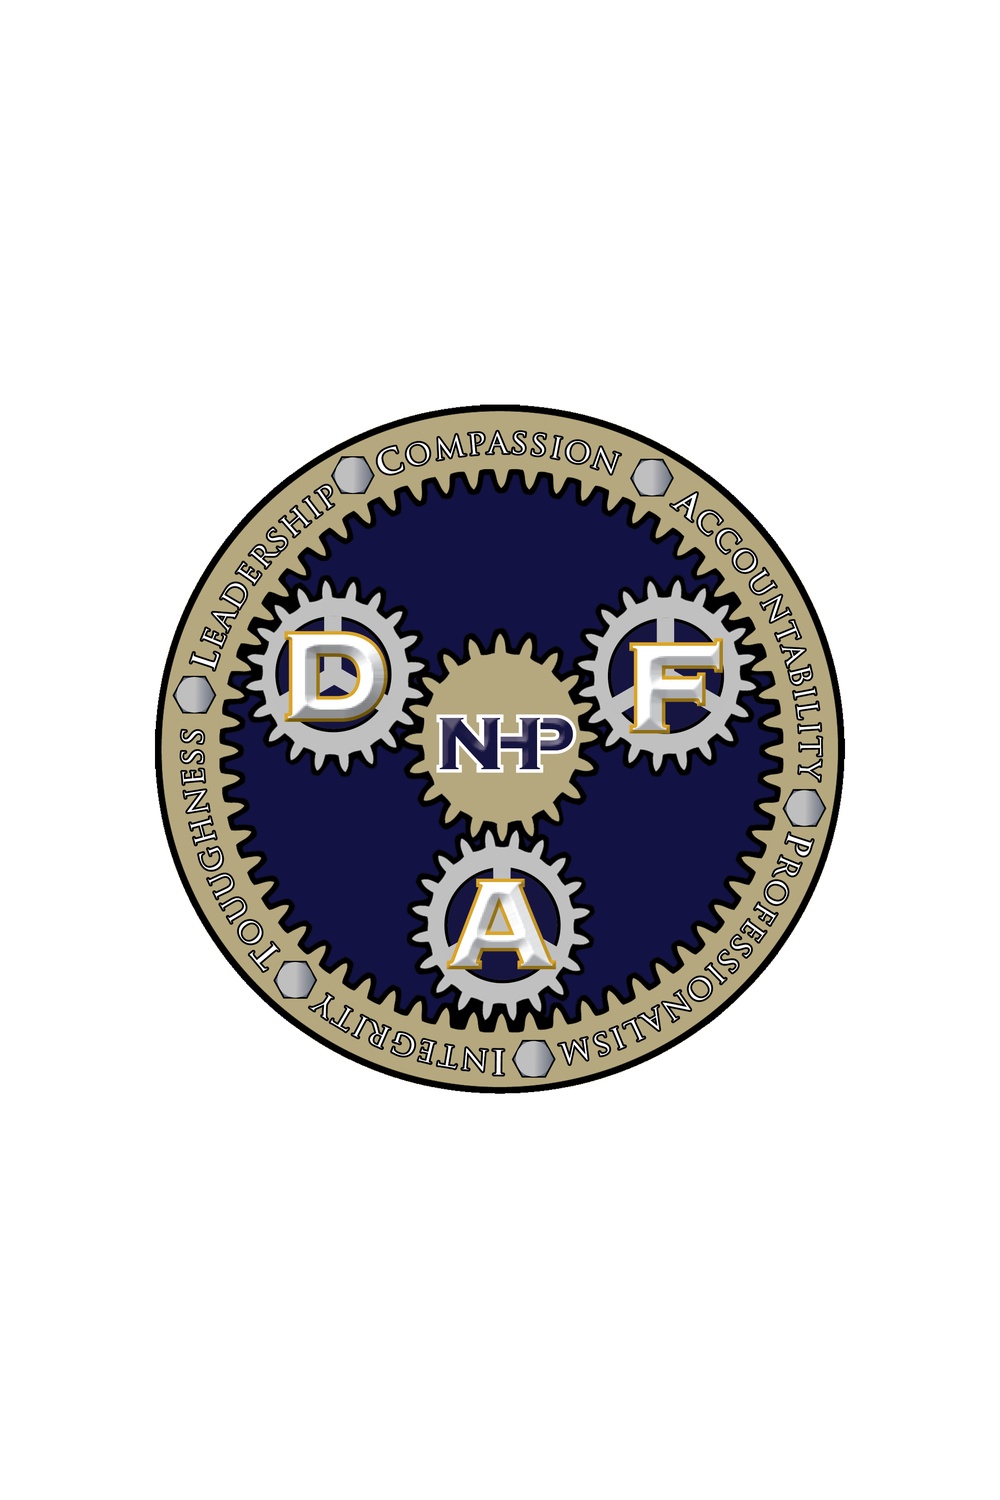 Director for Administration Coin